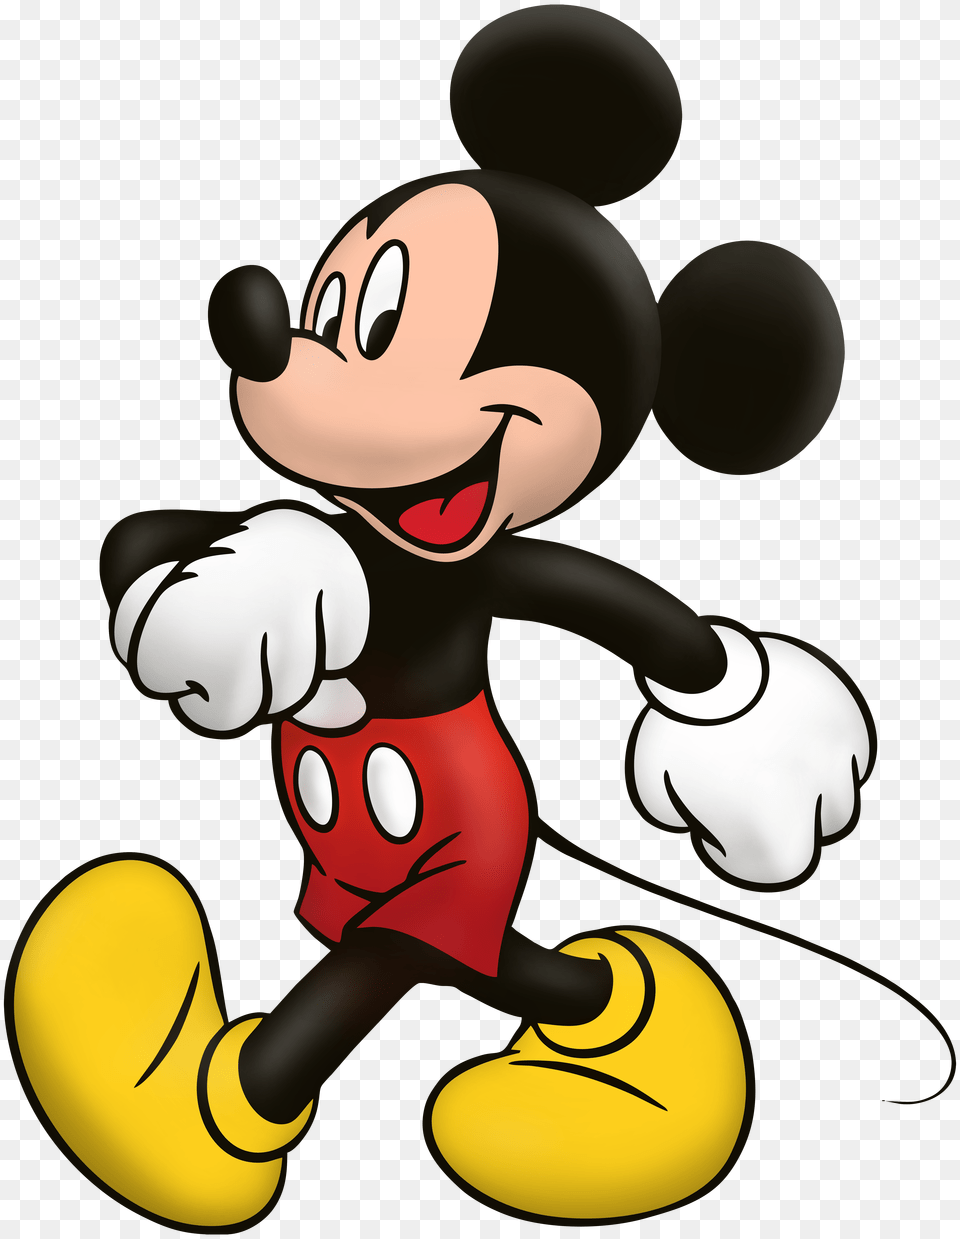 Mickey Mouse Cartoon, Guitar, Musical Instrument, Disk, Plectrum Png